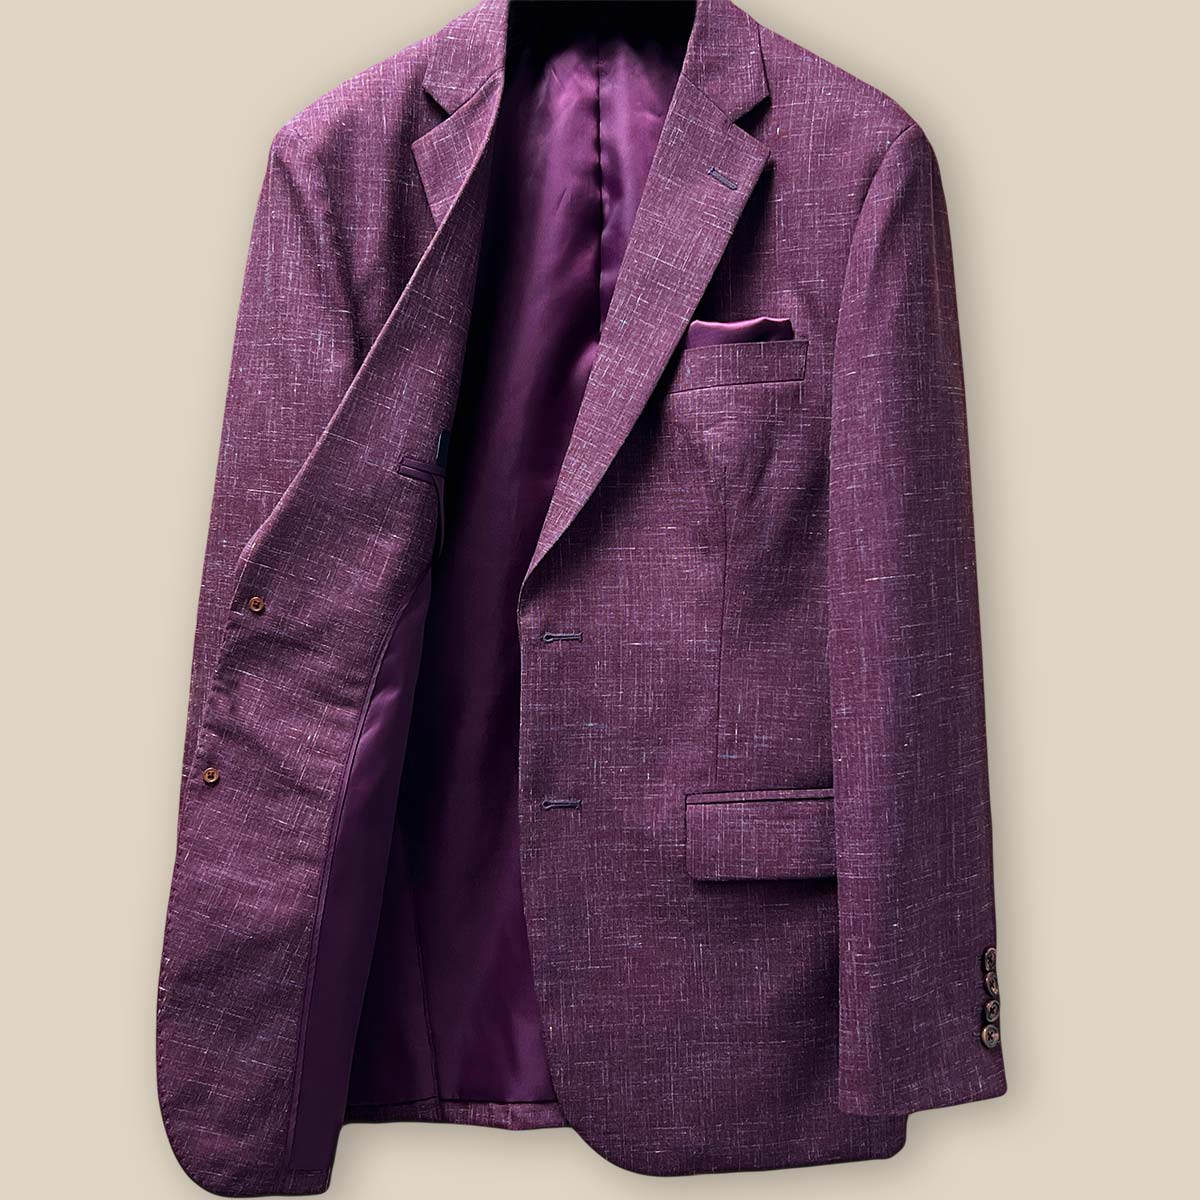 Interior view of the right side of a cranberry men's suit jacket by Westwood Hart, showing detailed stitching and pocket placement.